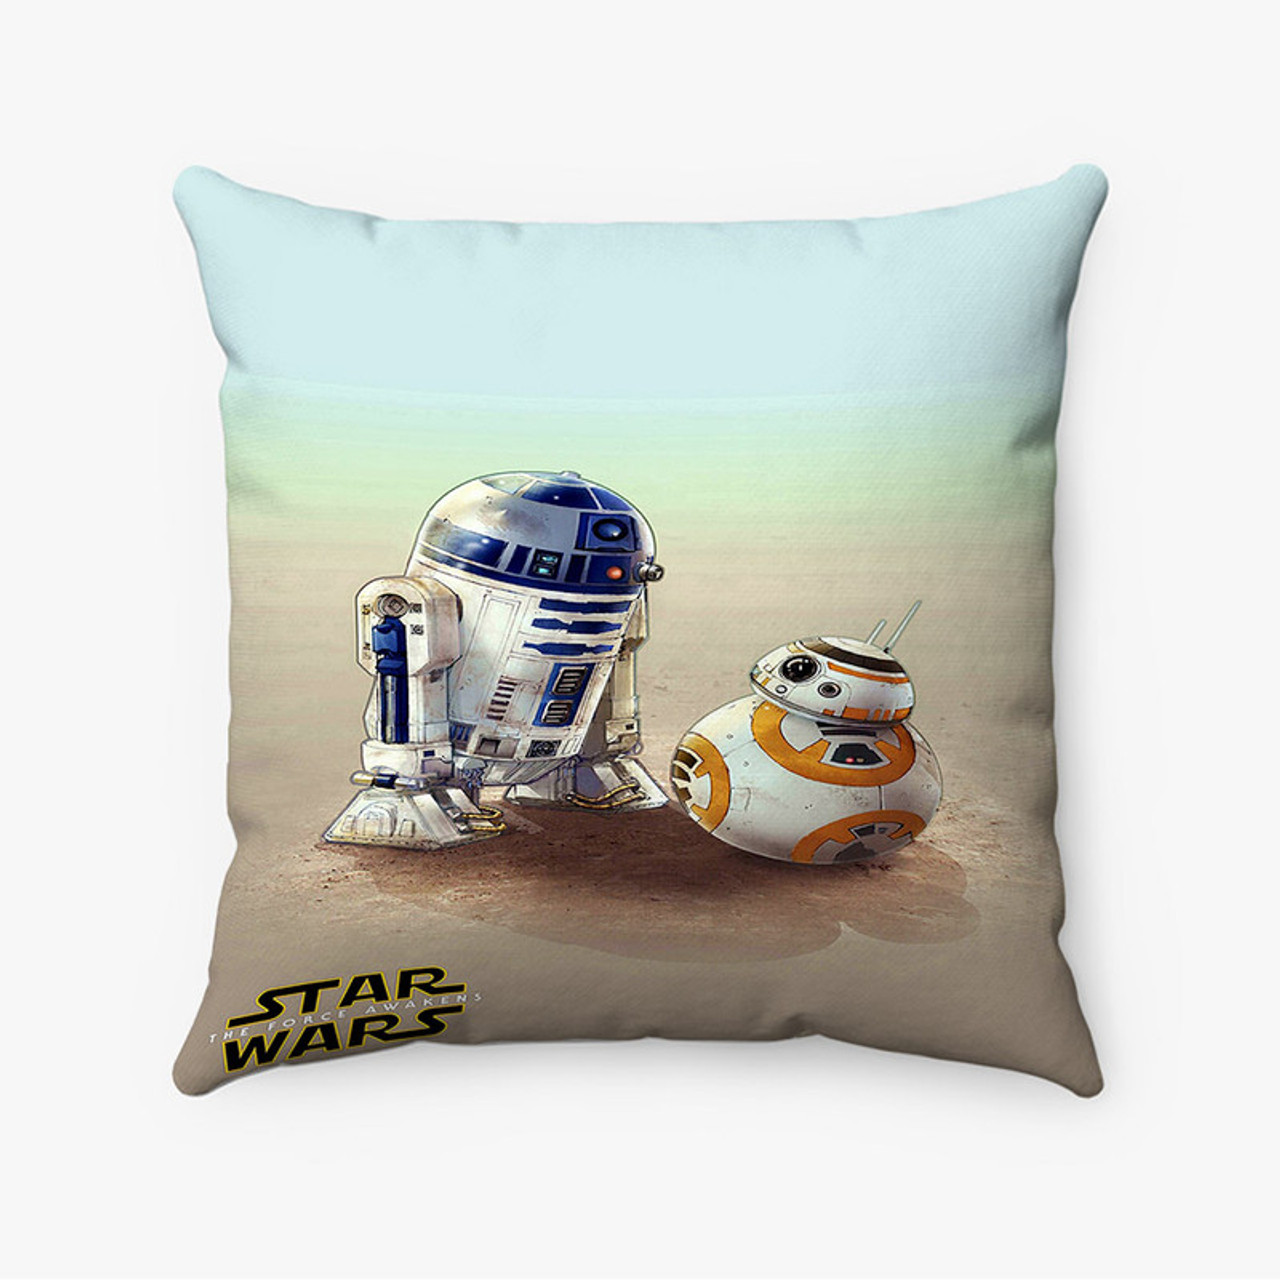 https://cdn11.bigcommerce.com/s-xhmrmcecz5/images/stencil/1280x1280/products/200140/205500/R2-D2-and-BB8-Star-Wars-The-Force-Awakens-Custom-Pillow-Case__51596.1673668820.jpg?c=1